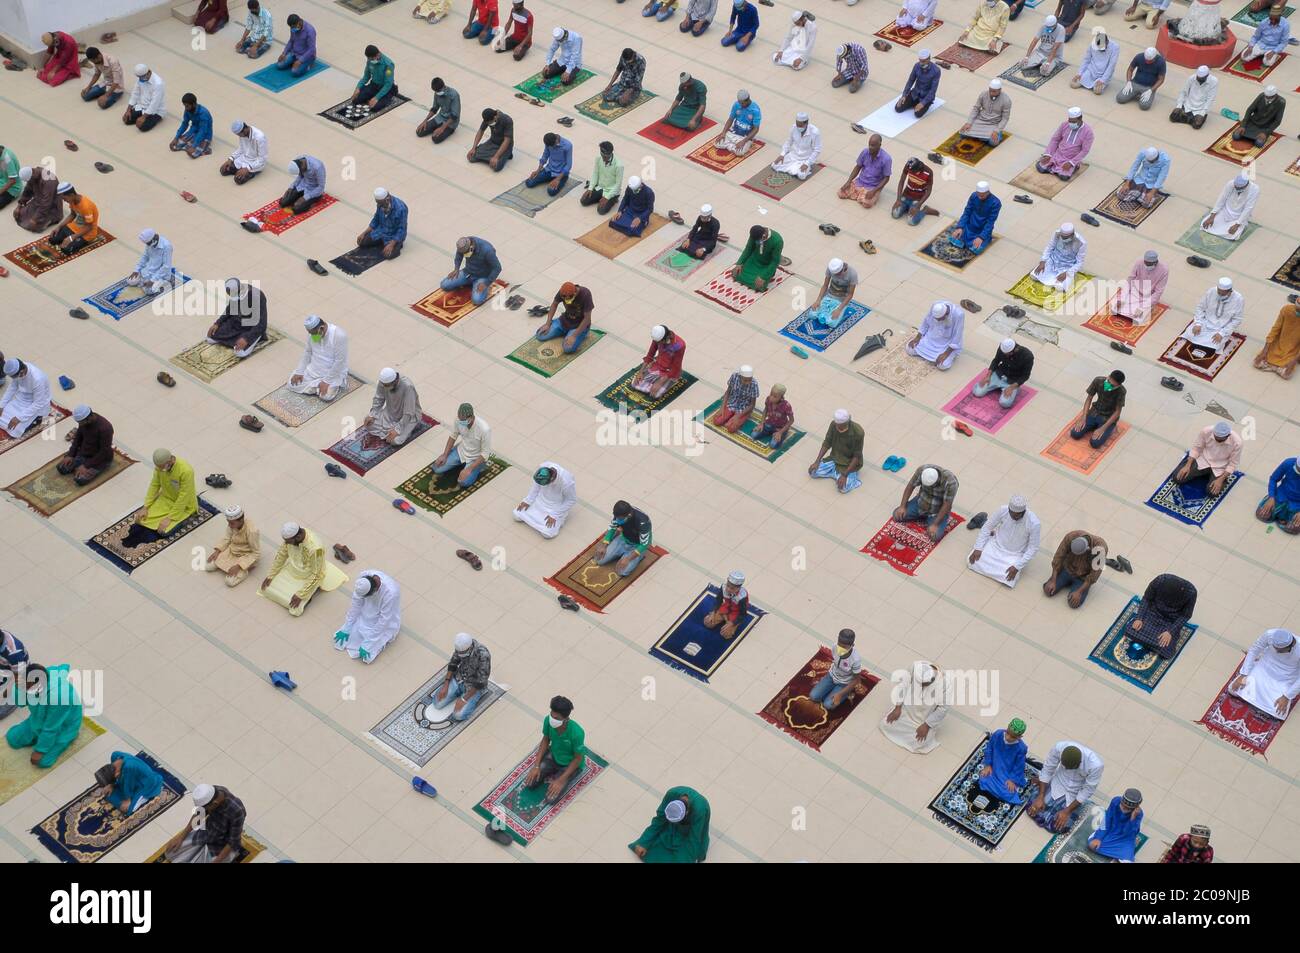 Muslims attend Friday prayers in congregation at Hazrat Shahjalal (R) mosque, Sylhet, Bangladesh while taking health protocols and proper social maint Stock Photo